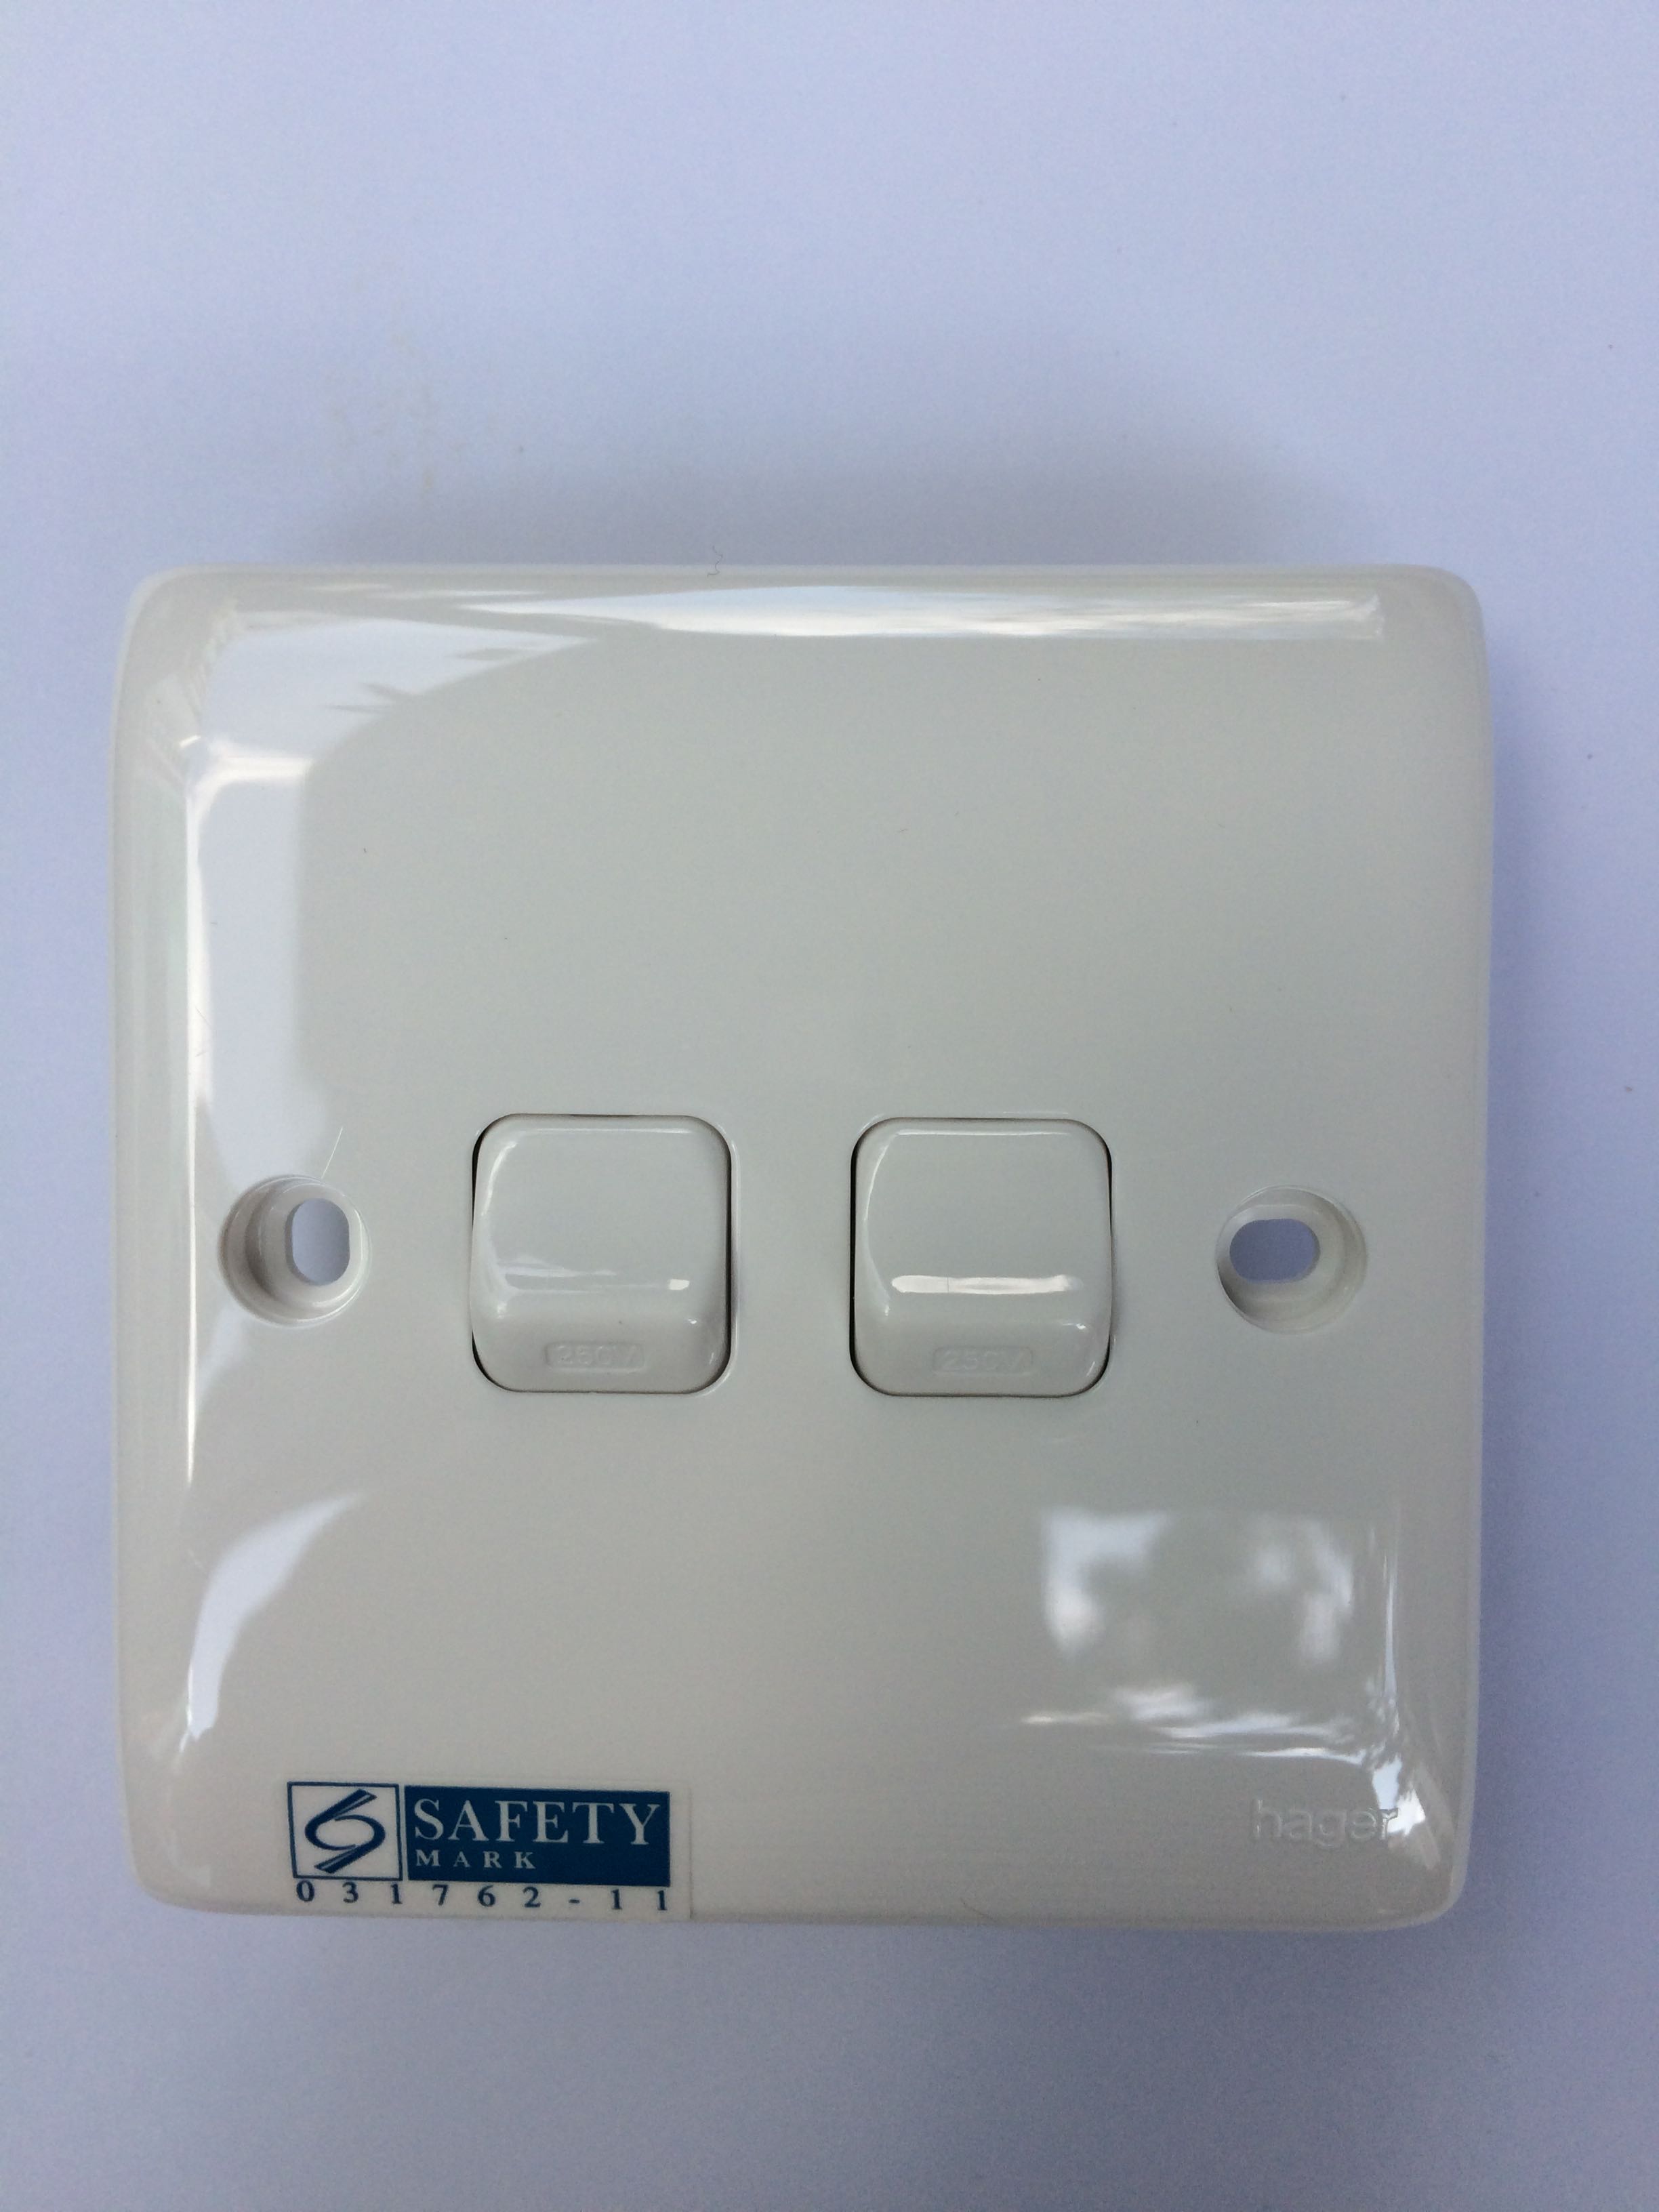 Repair Lighting Switch, Heater Switch,13A Socket Outlet,Supply & Replace with New LED Light